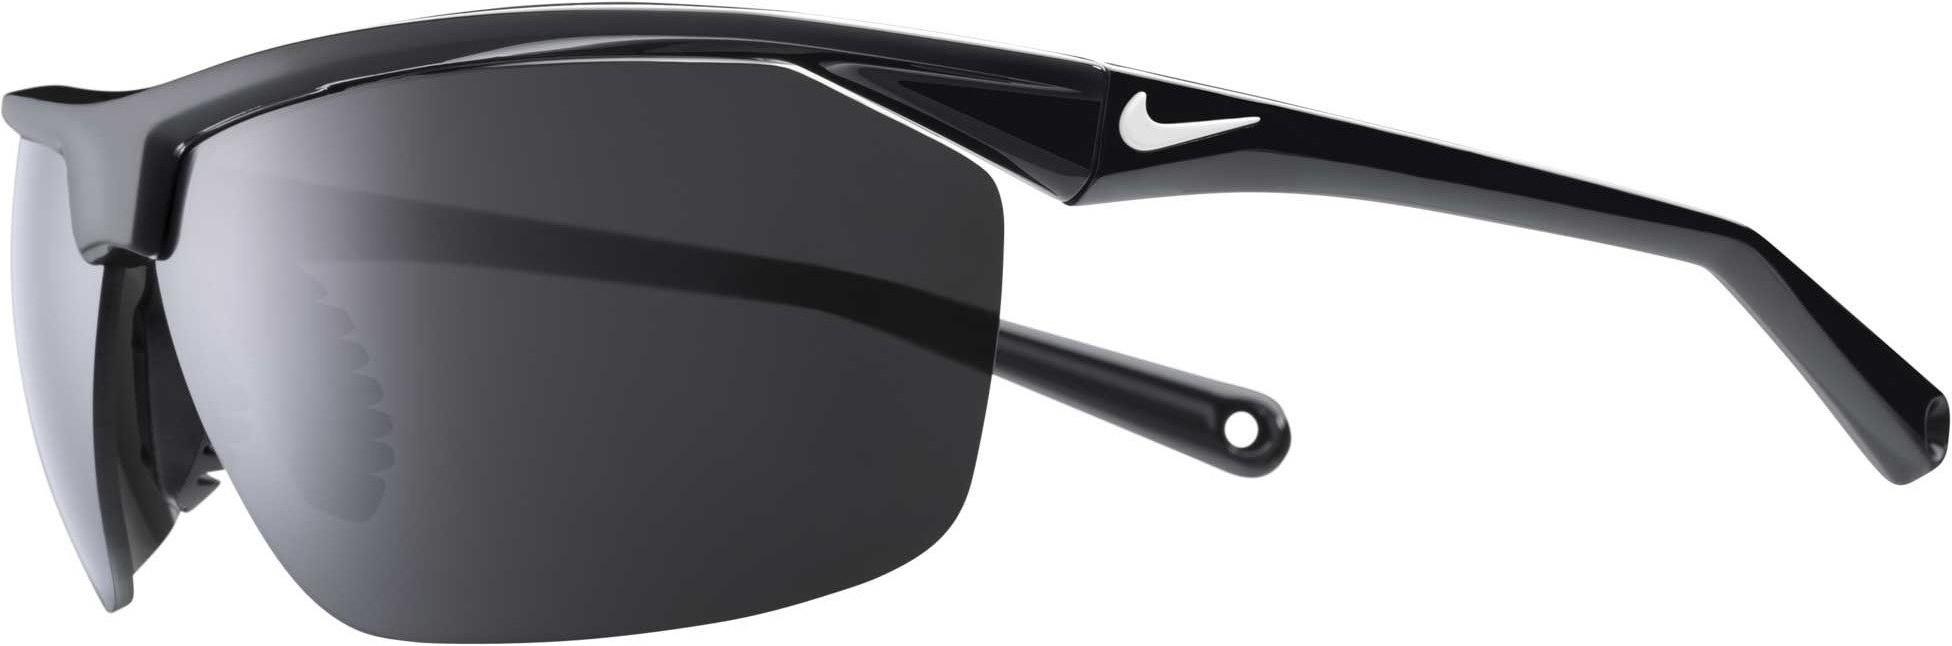 nike tailwind sunglasses review